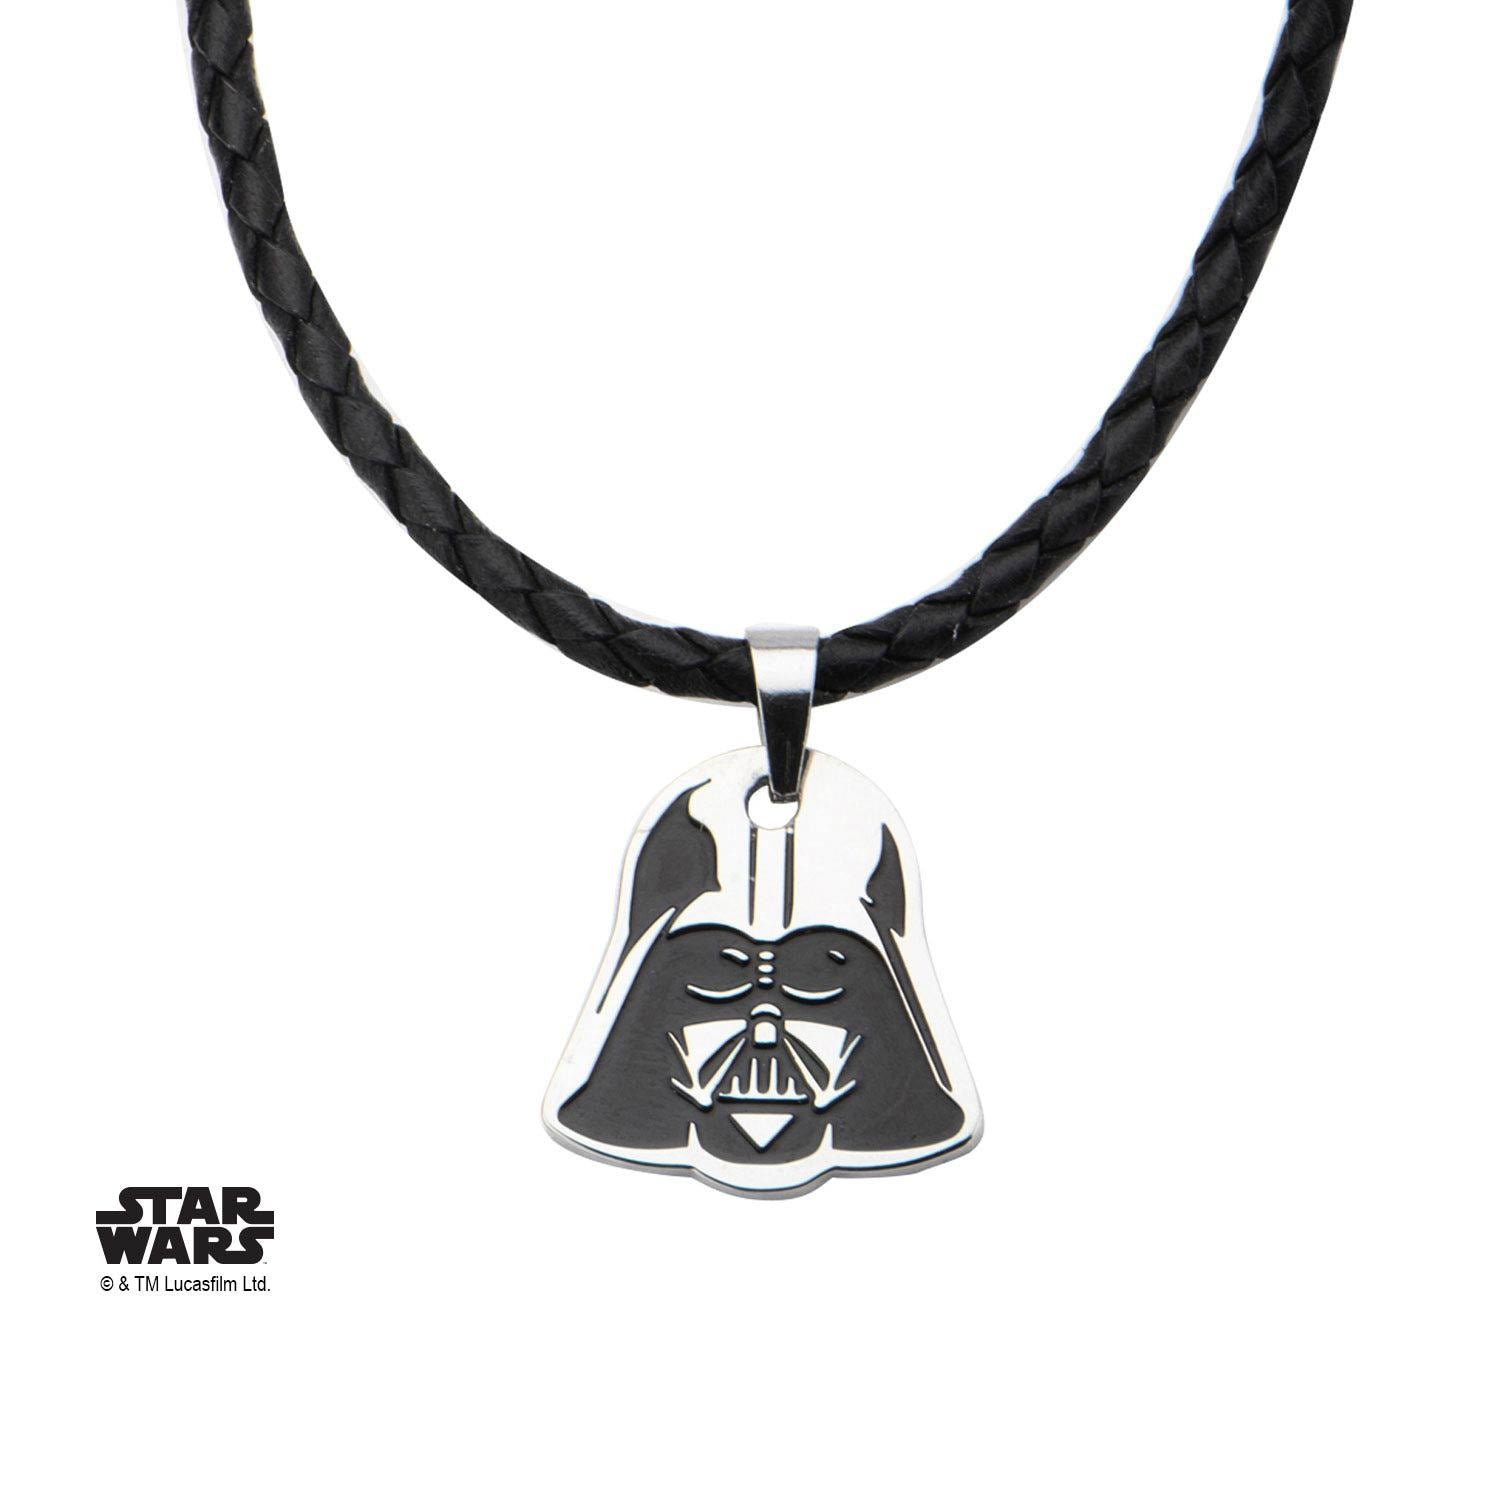 Star Wars Darth Vader Small Pendant with Black Leather Necklace